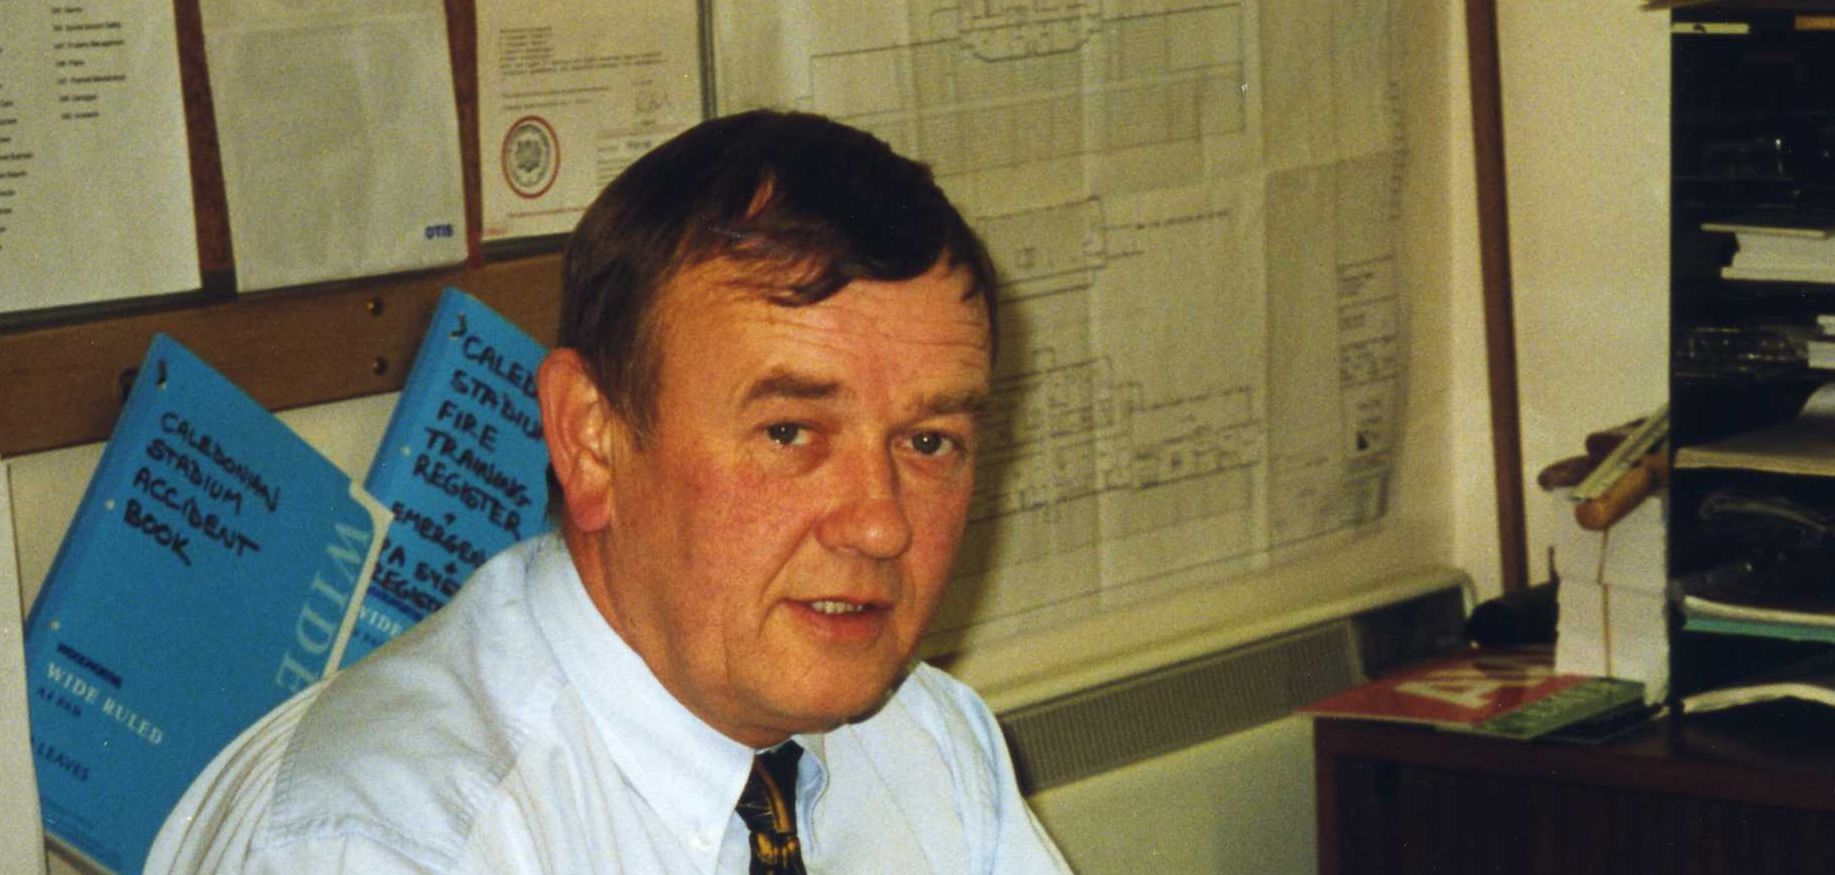 More information about "RIP: John Sutherland MBE"